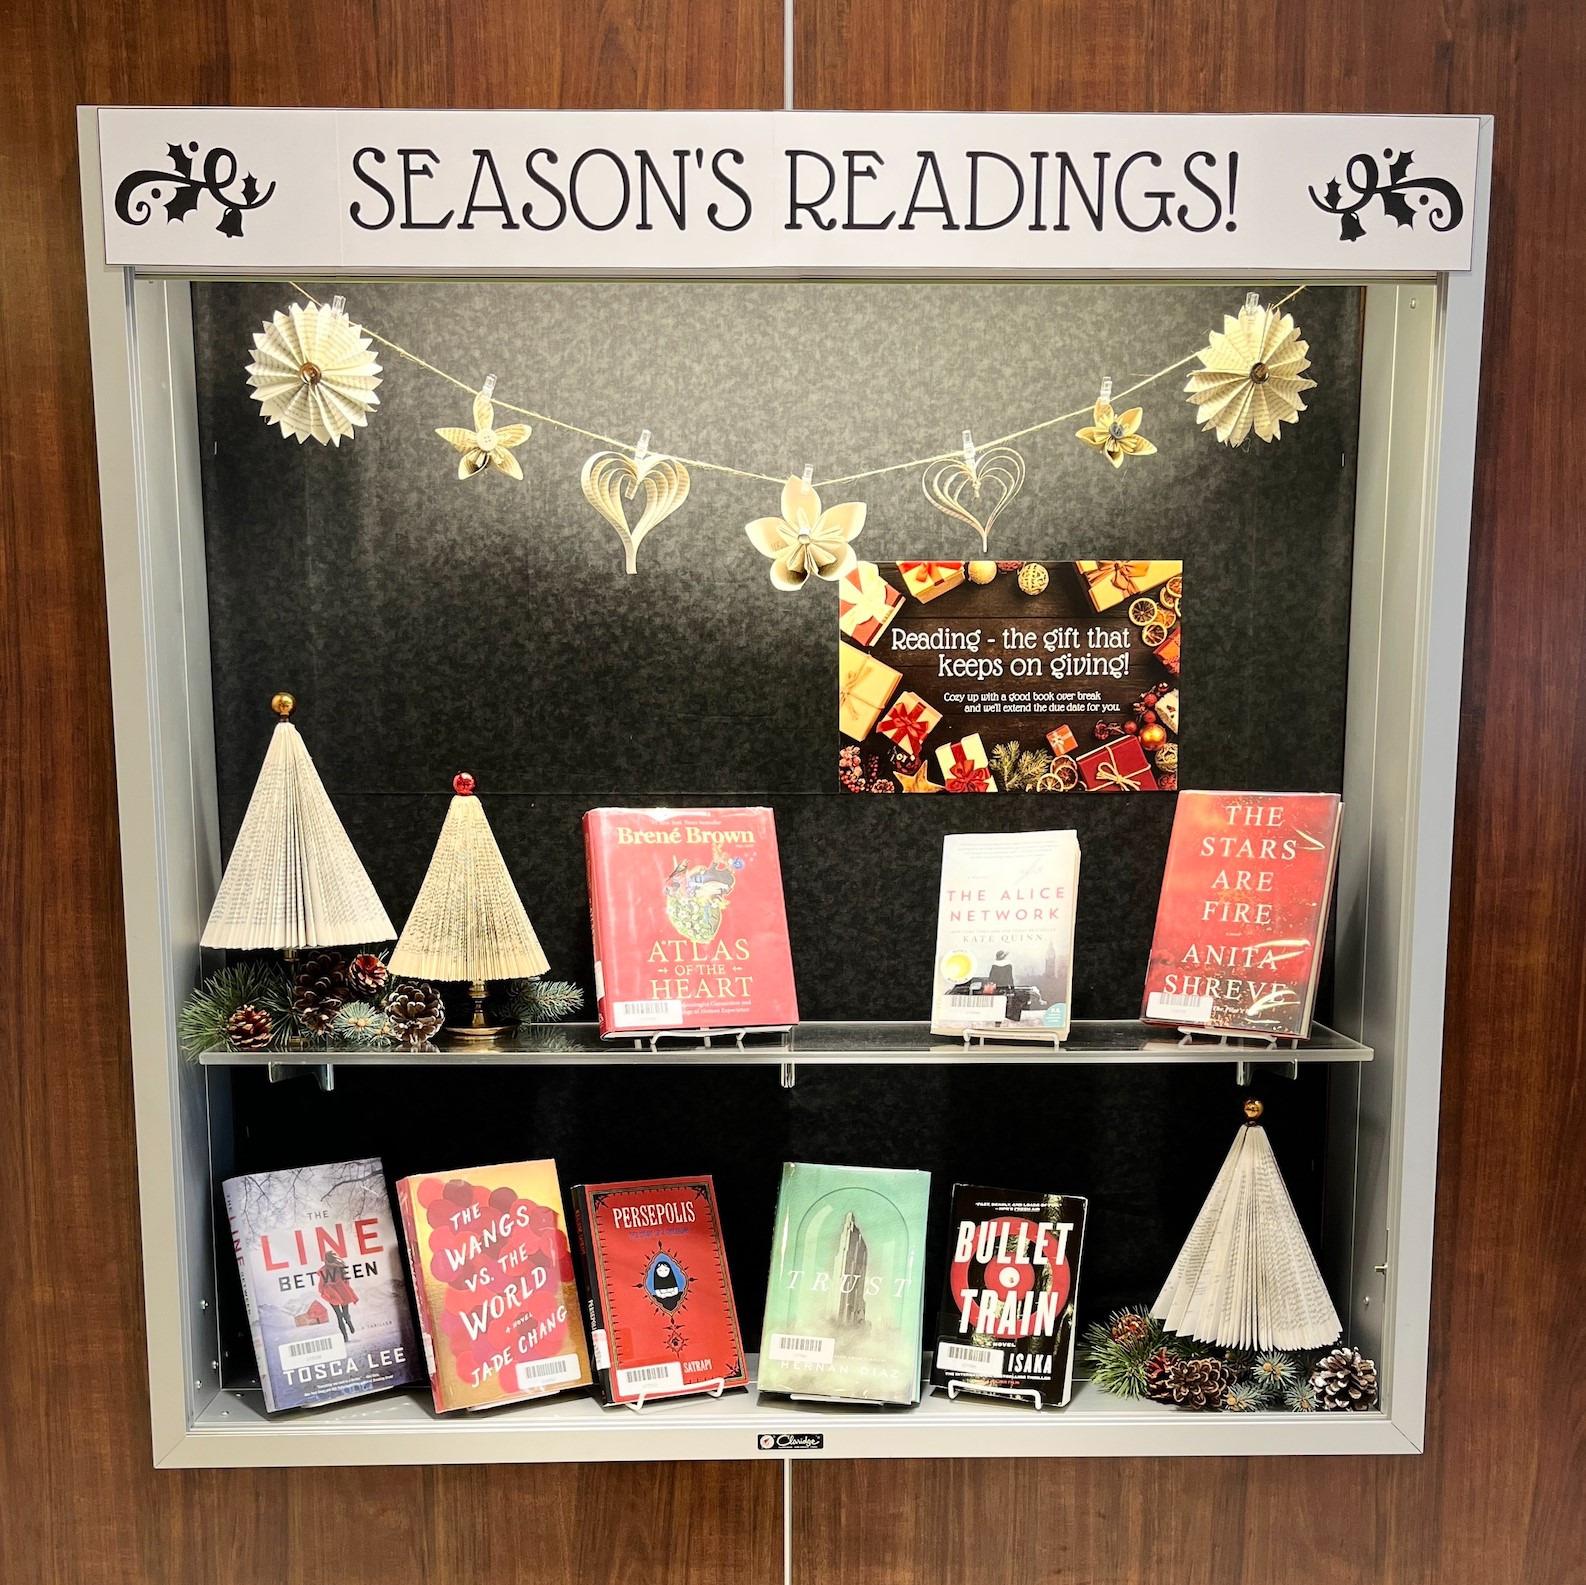 We know it’s hard to think about fun reading right now, but check out our display of good reads! Take some home to enjoy over break. We’ll extend the due date for you!